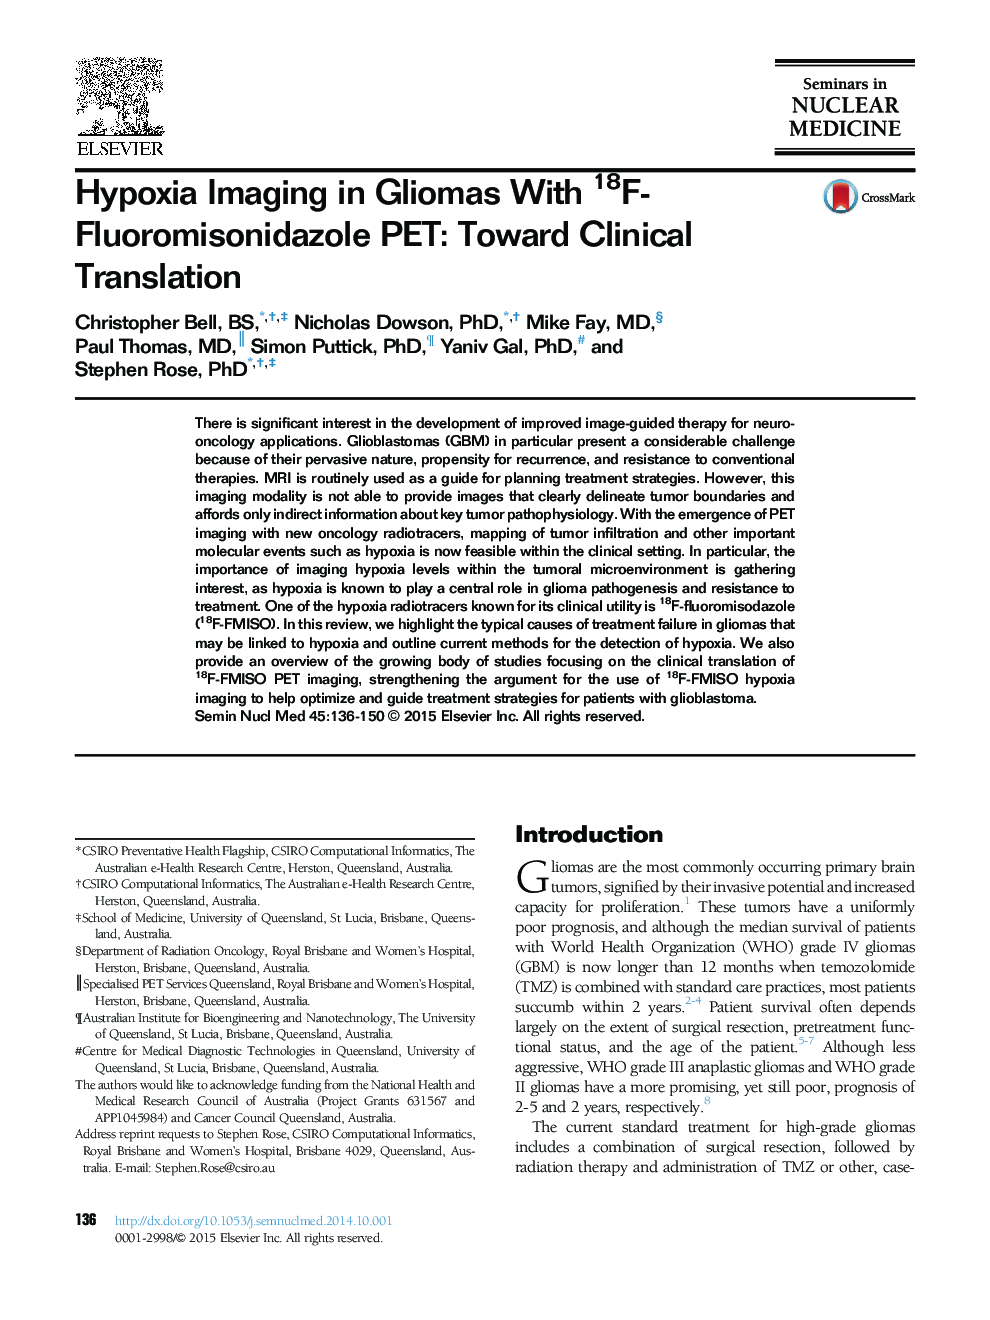 Hypoxia Imaging in Gliomas With 18F-Fluoromisonidazole PET: Toward Clinical Translation 